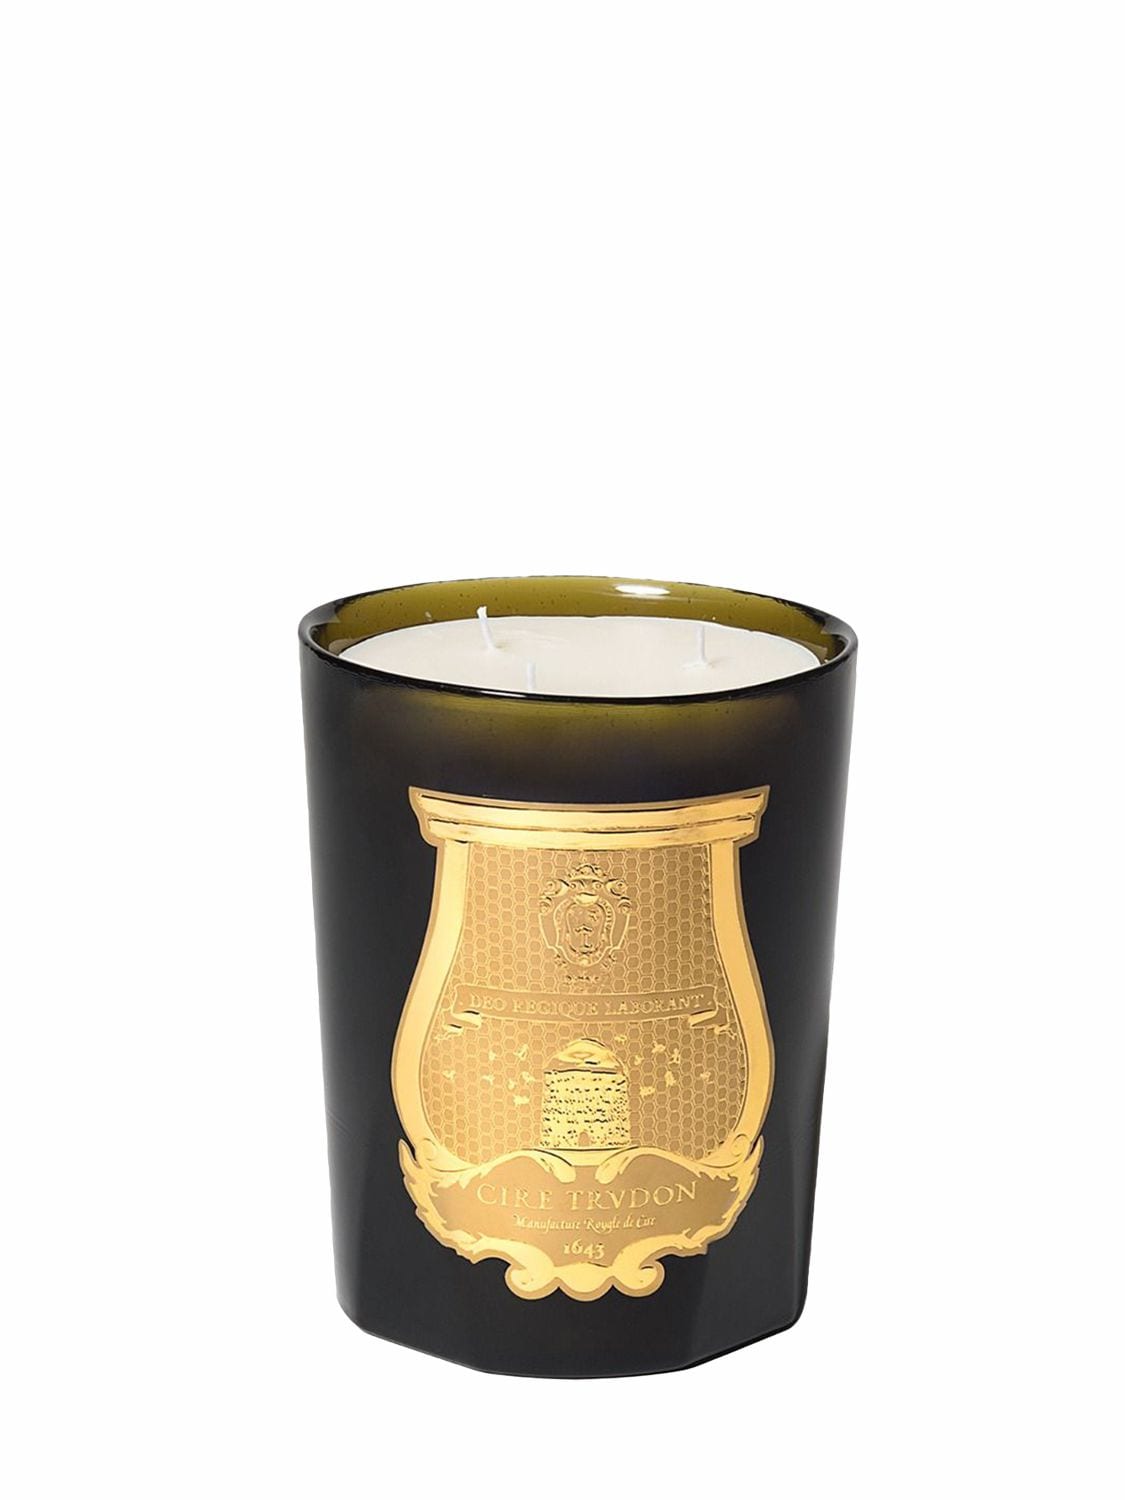 Trudon 800克ernesto Candle香氛蜡烛 In Green